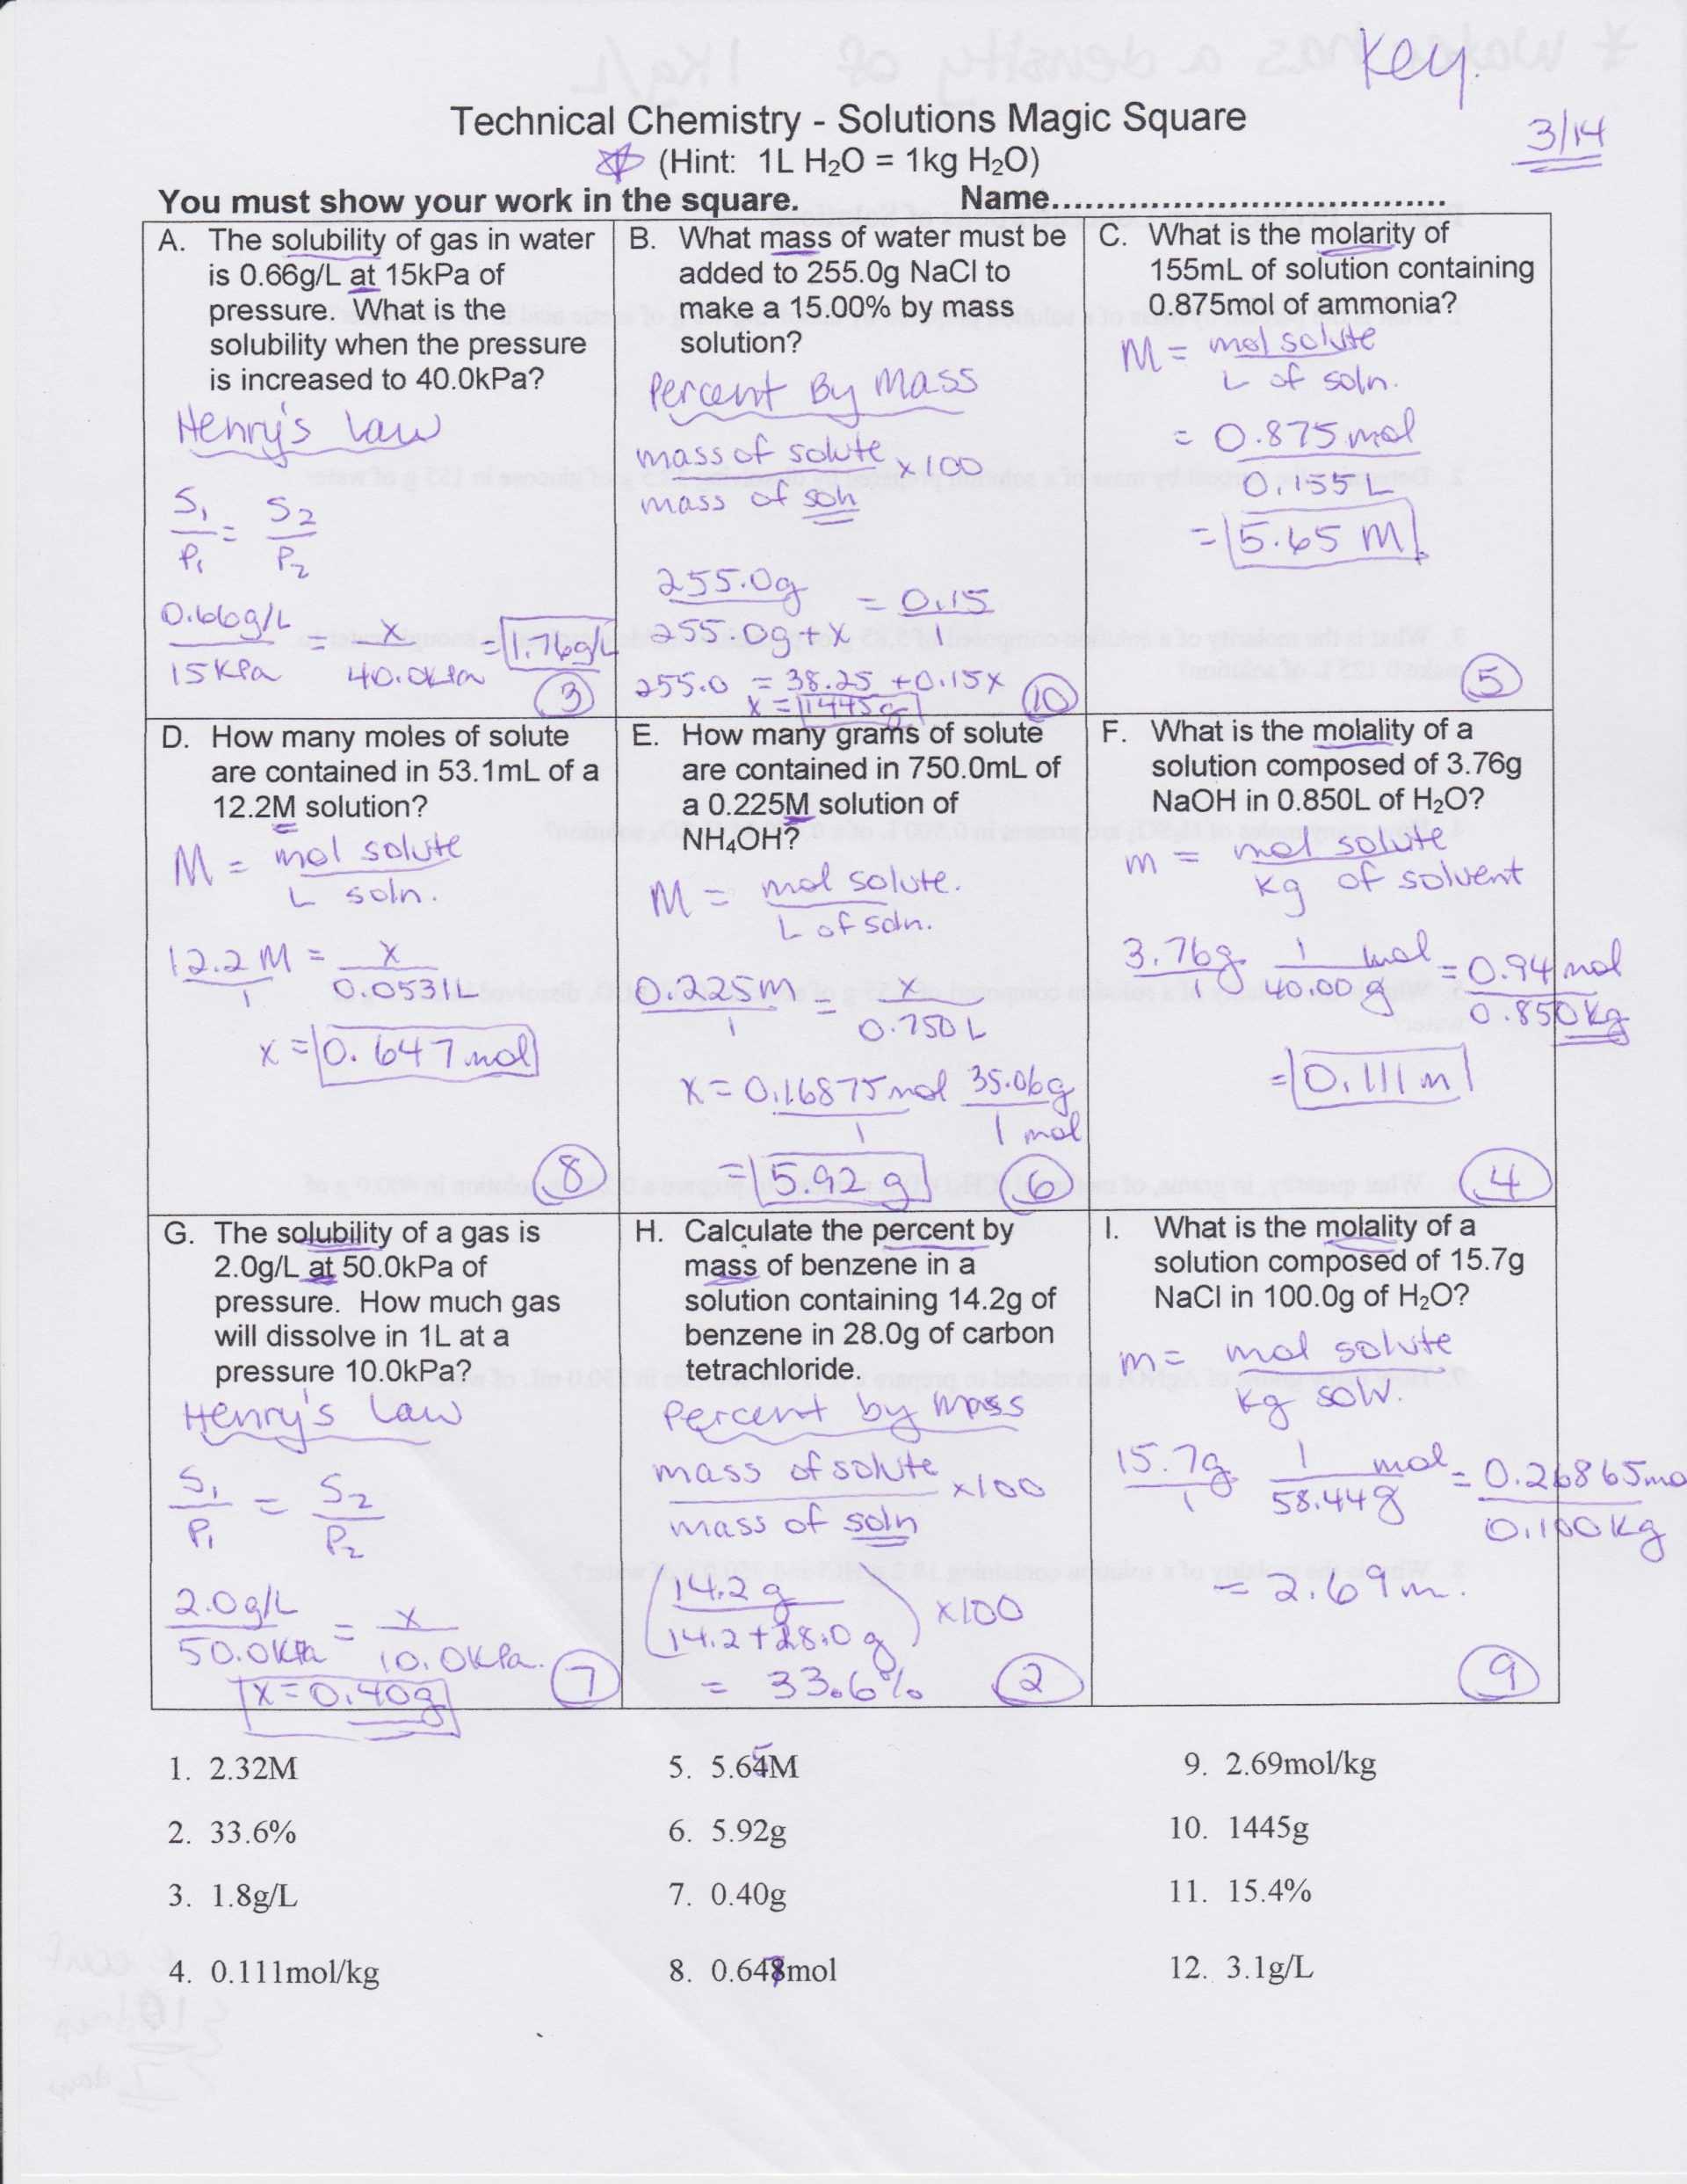 Geometry Reflection Worksheet or Magicuare 3×3 Worksheet Math Worksheets Accounting